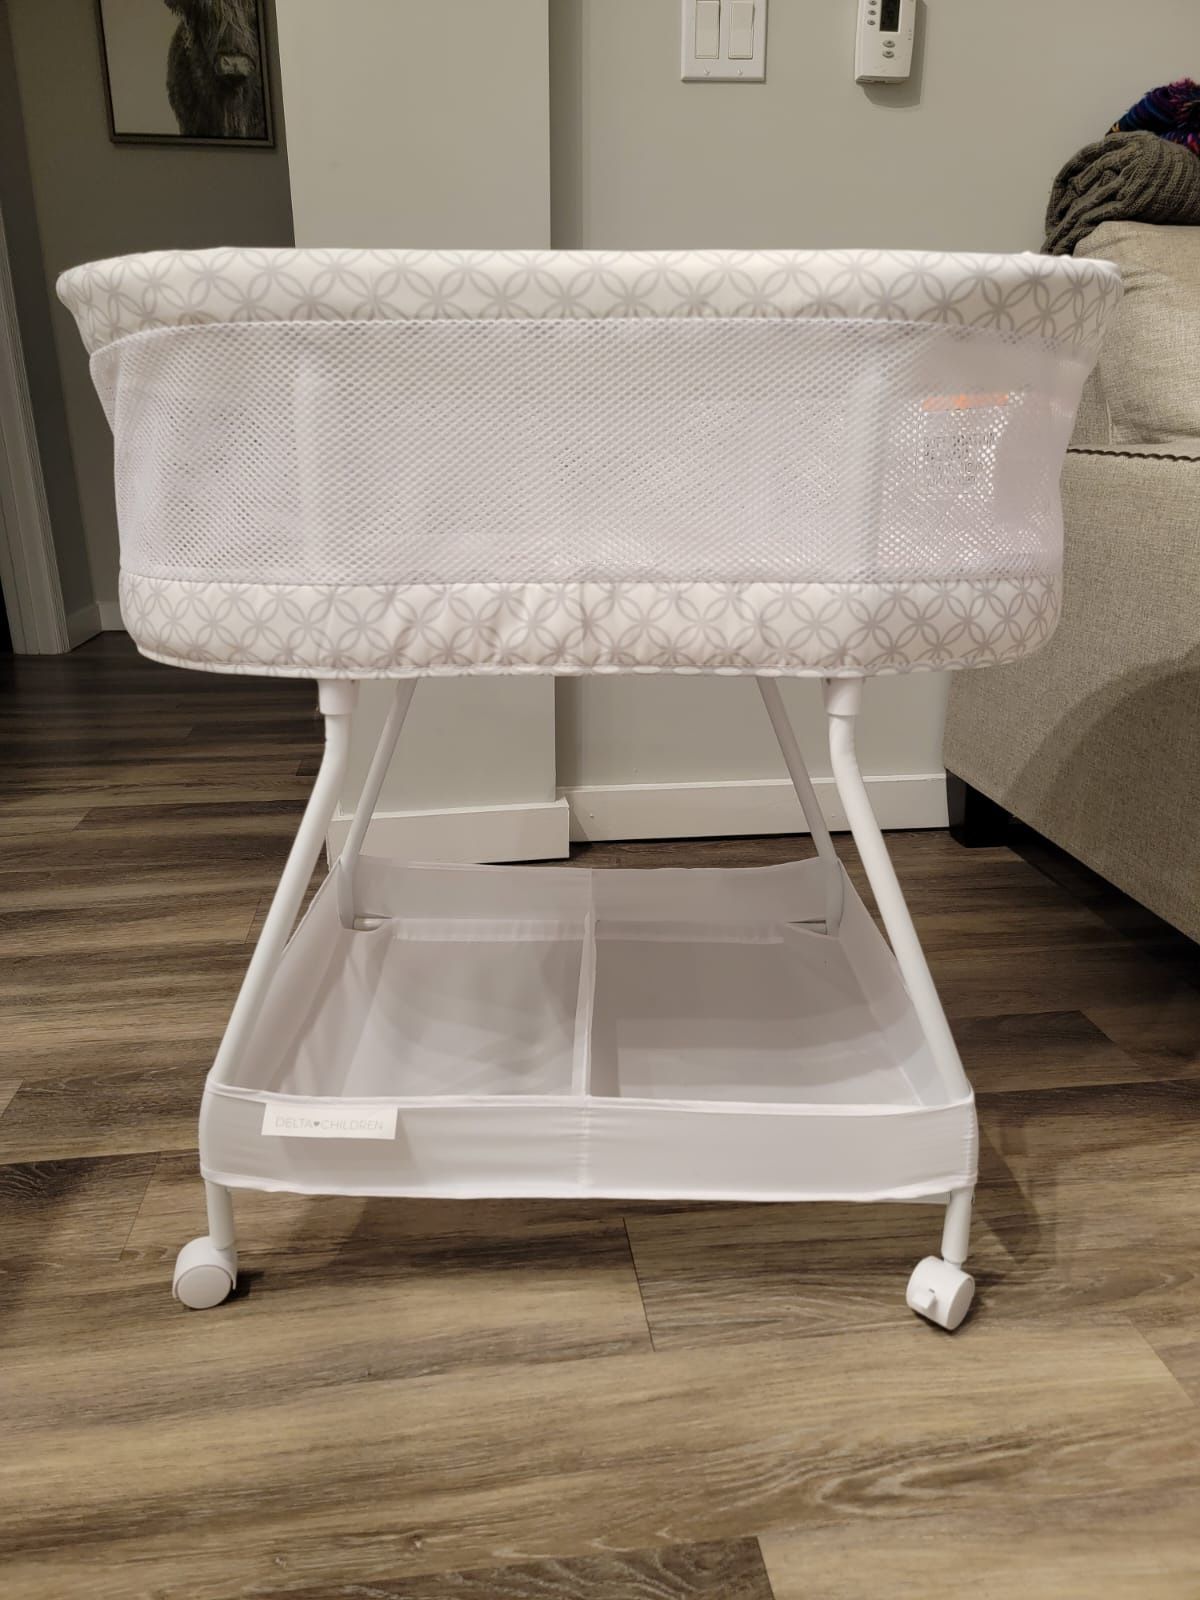 Baby bassinet With Vibration